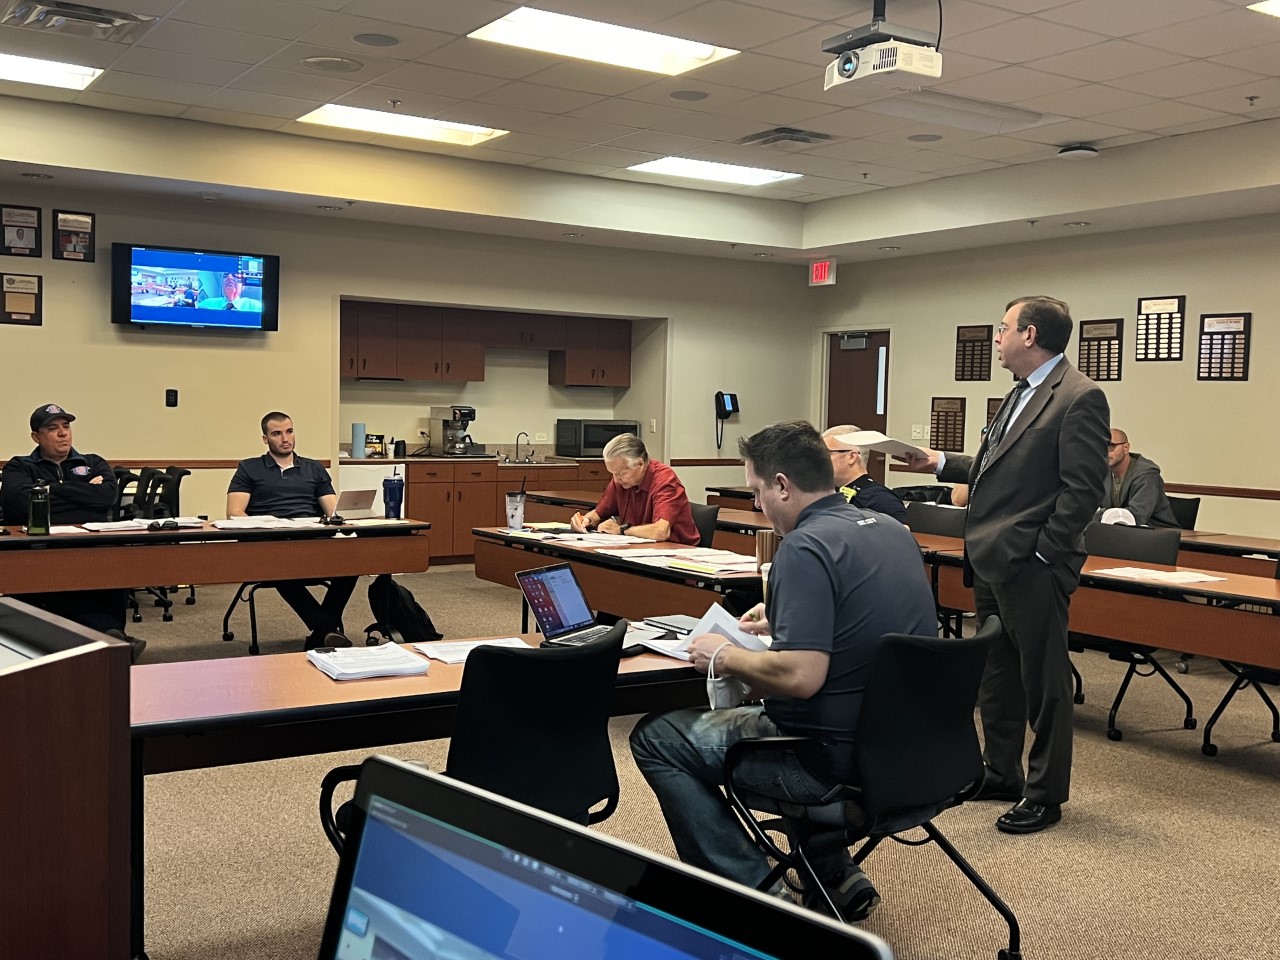 The Board of Trustees received the 175 Audit Report from Mr. Richard Cristini. Pictured here is Attorney Adam Levinson discussing the findings and options. To view the report click on the following link: <a href='http://www.bbffp.org/docs/announcements/PremiumTaxMoneyReport.pdf#zoom=100' class='lnkSlider' target='_blank'>175 Audit Report</a>.